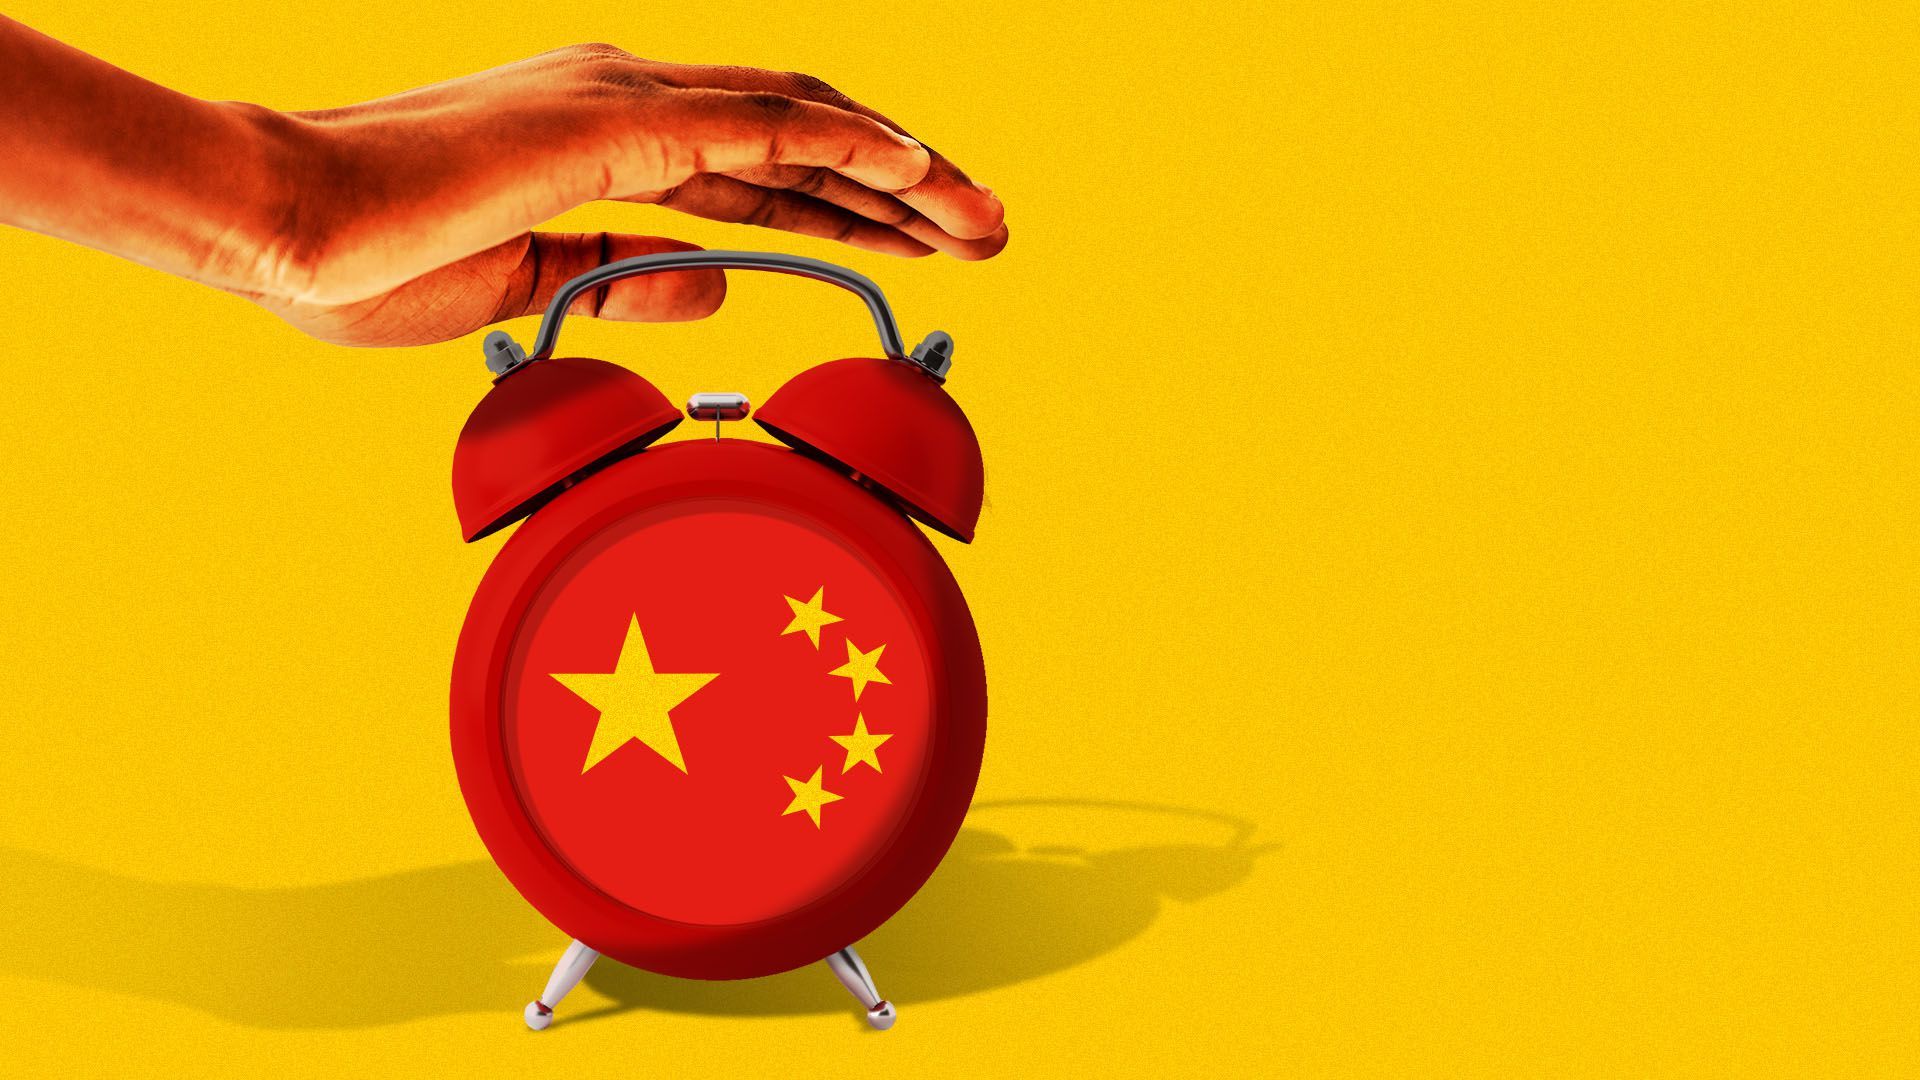 Illustrated of a red alarm clock with a Chinese flag face about to be shut off by a hand